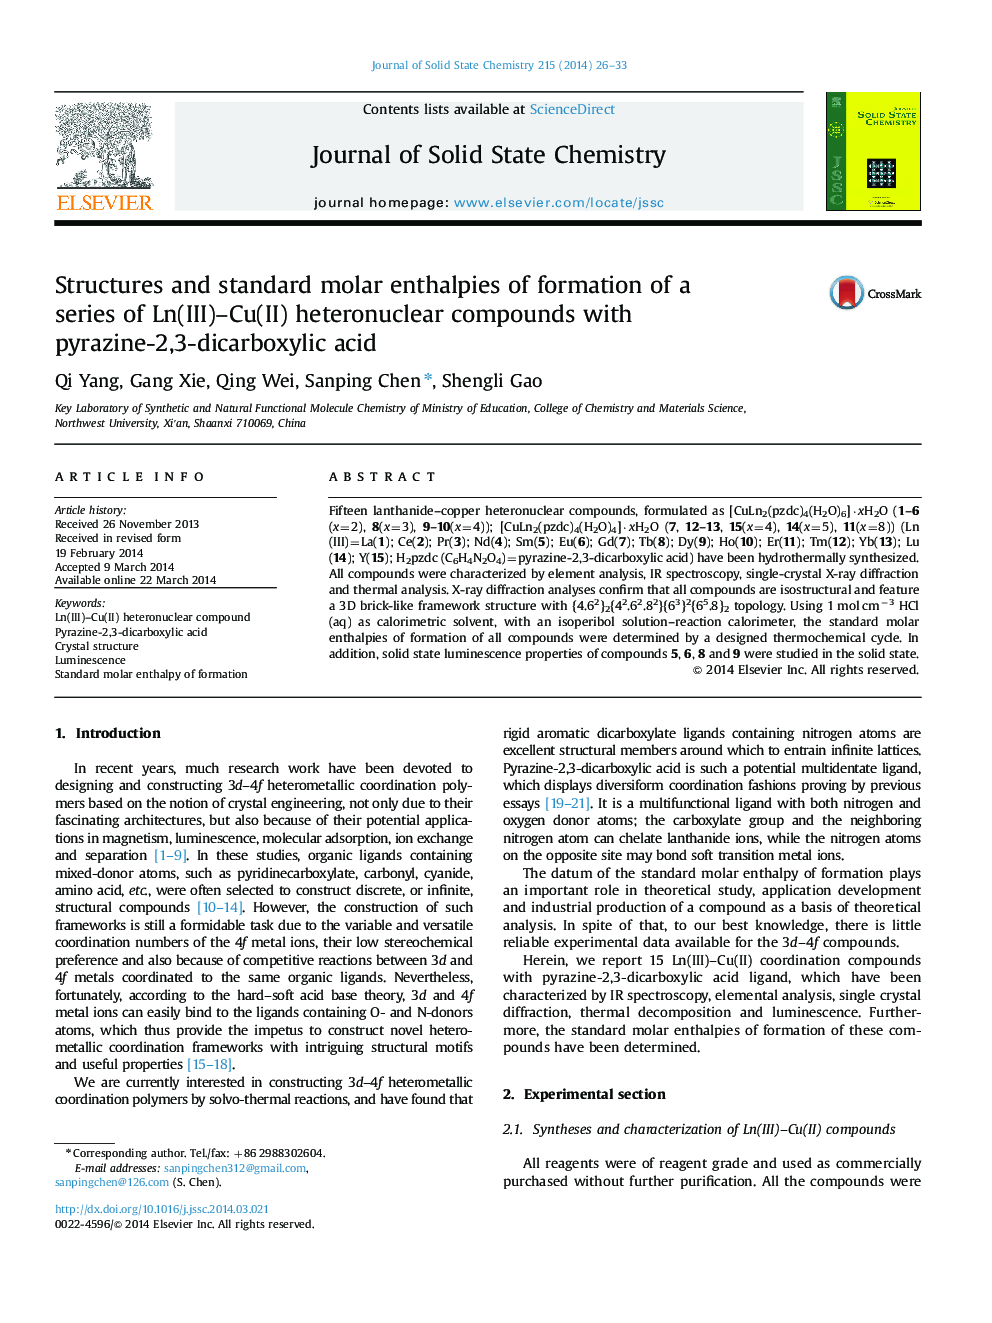 Structures and standard molar enthalpies of formation of a series of Ln(III)-Cu(II) heteronuclear compounds with pyrazine-2,3-dicarboxylic acid